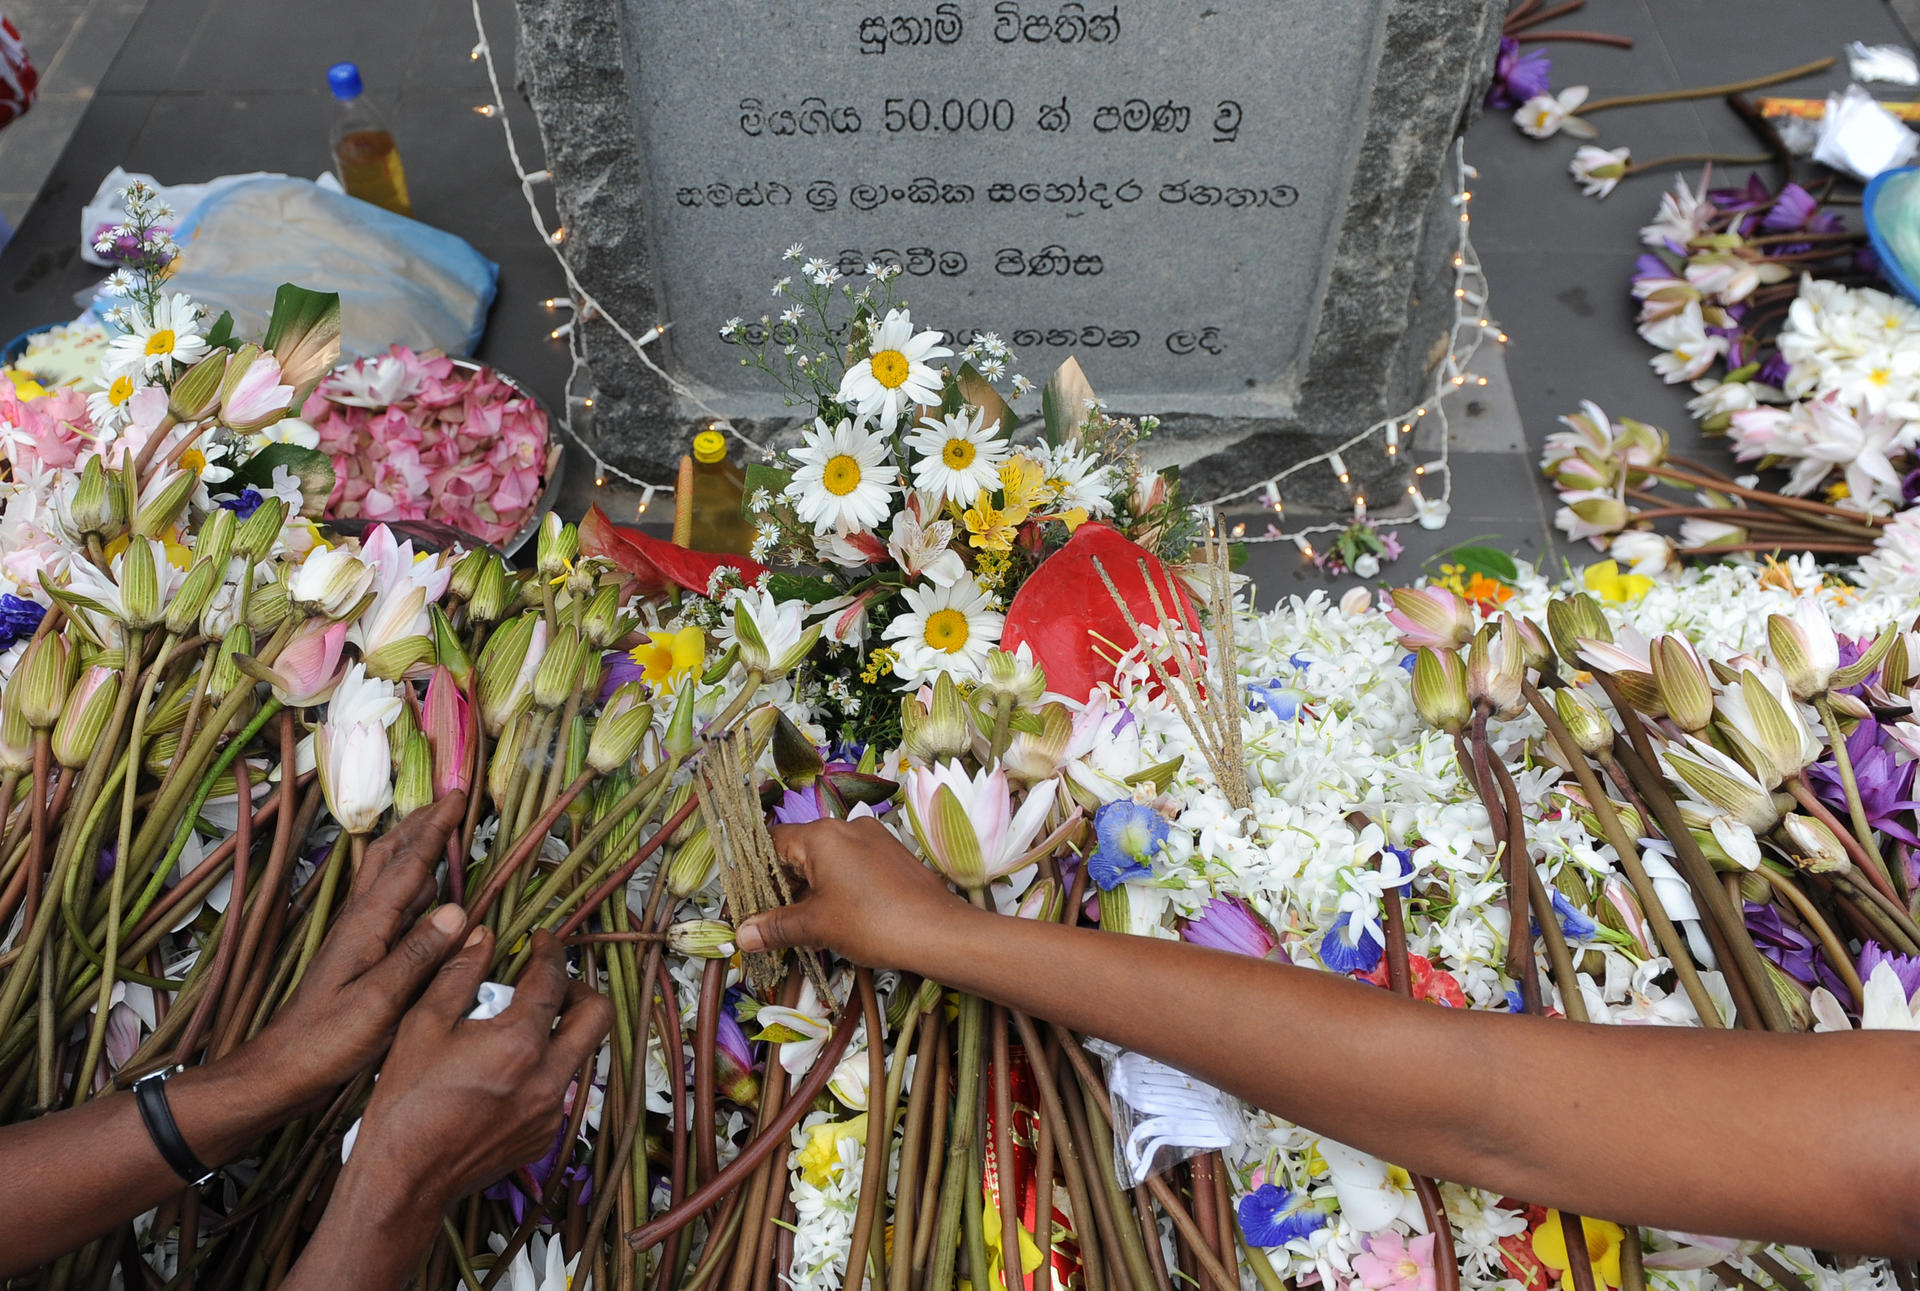 The Indian Ocean tsunami of December 26, 2004 killed at least 275,000 people in a dozen countries. Photo: AFP